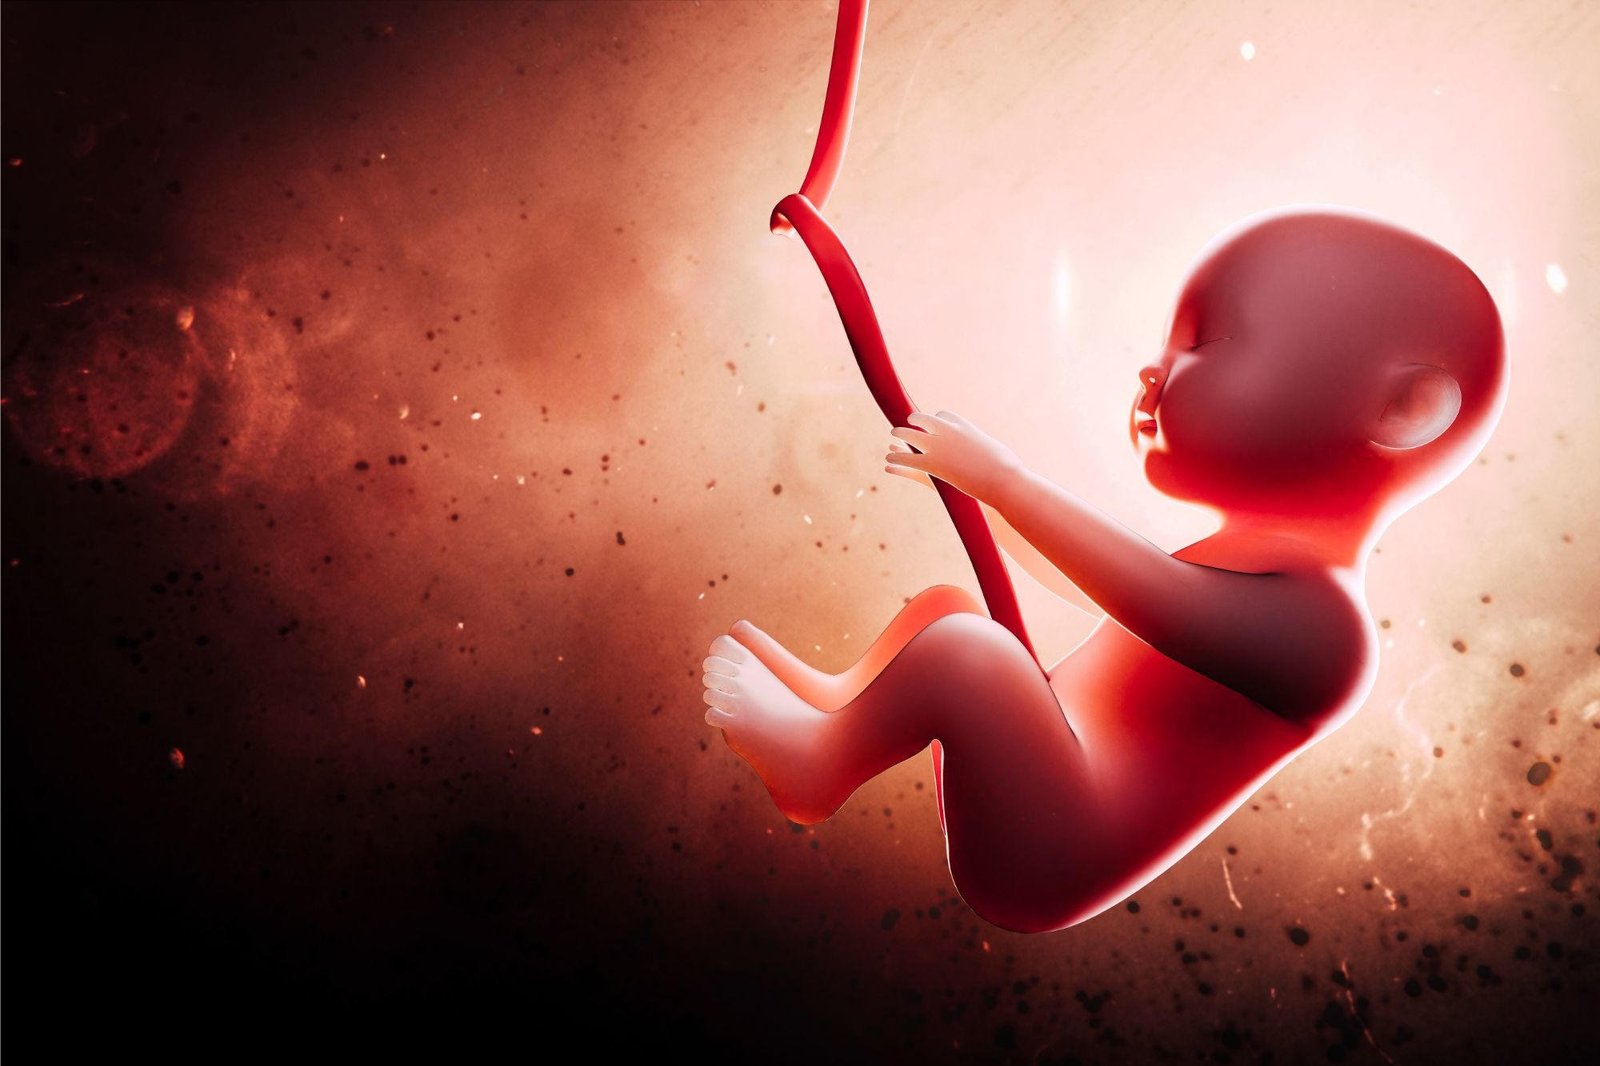 Nanoparticles Found To Have Mysterious Effects on Unborn Children